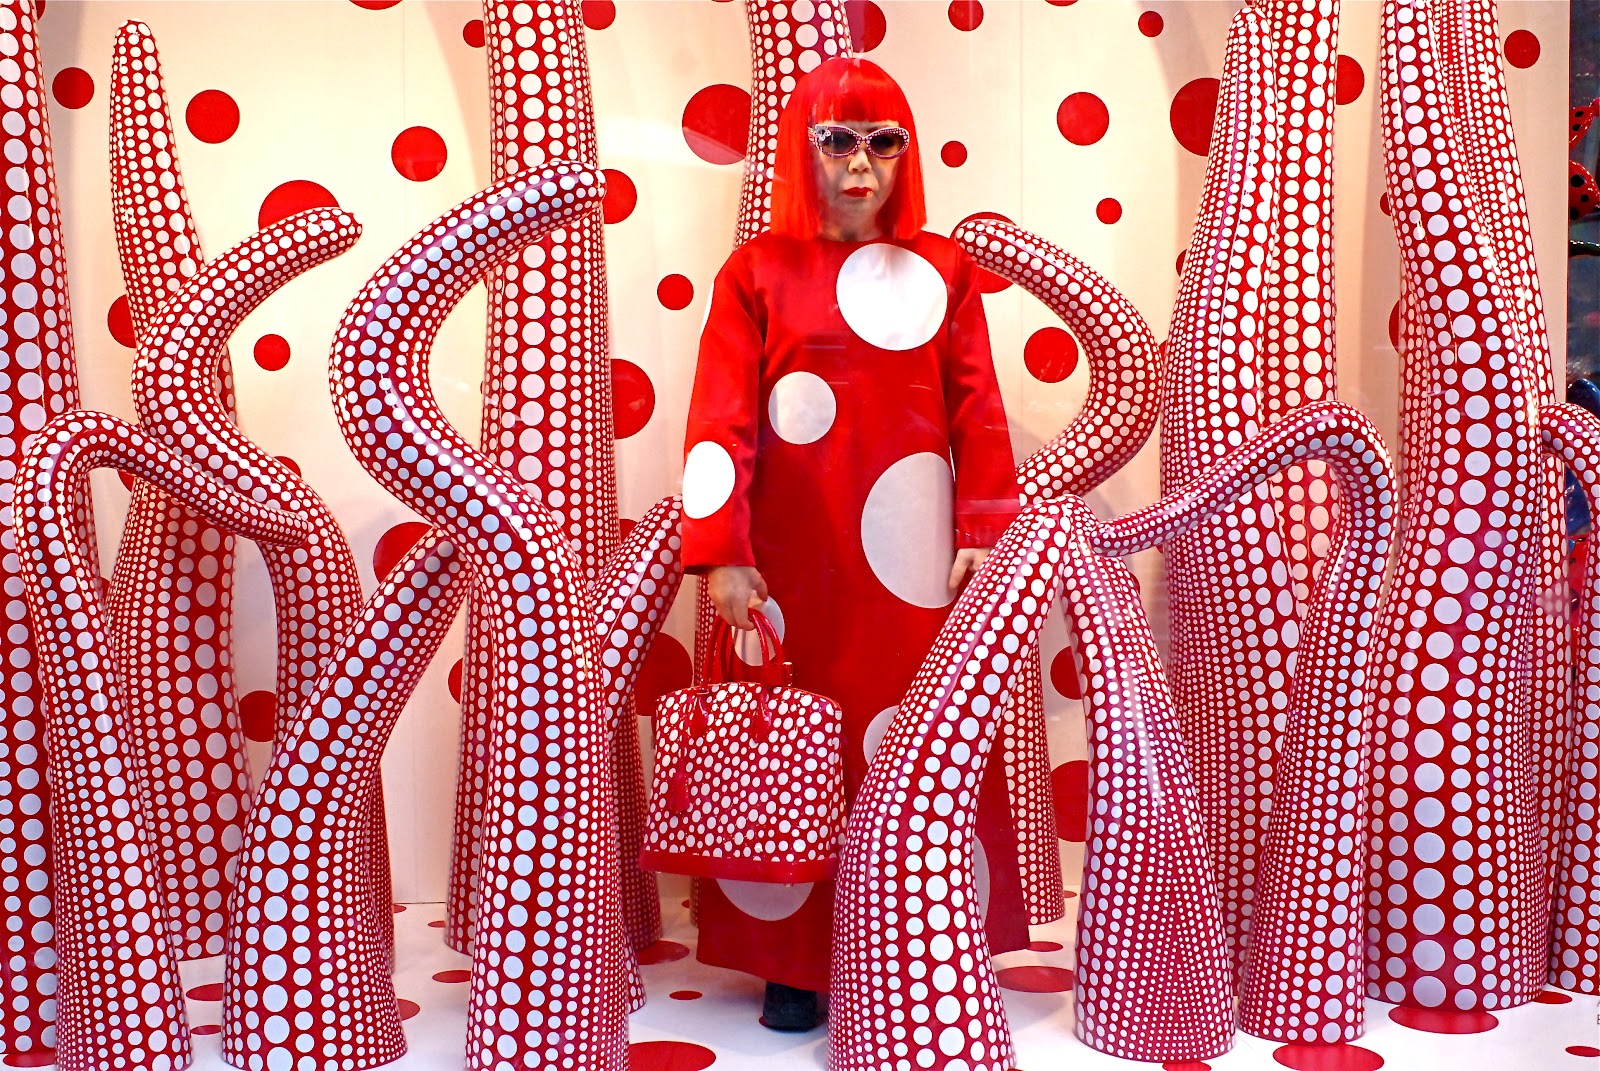 NYC ♥ NYC: Louis Vuitton Collaborates With Artist Yayoi Kusama - Manhattan  Flagship Store Facade and Window Displays On Fifth …